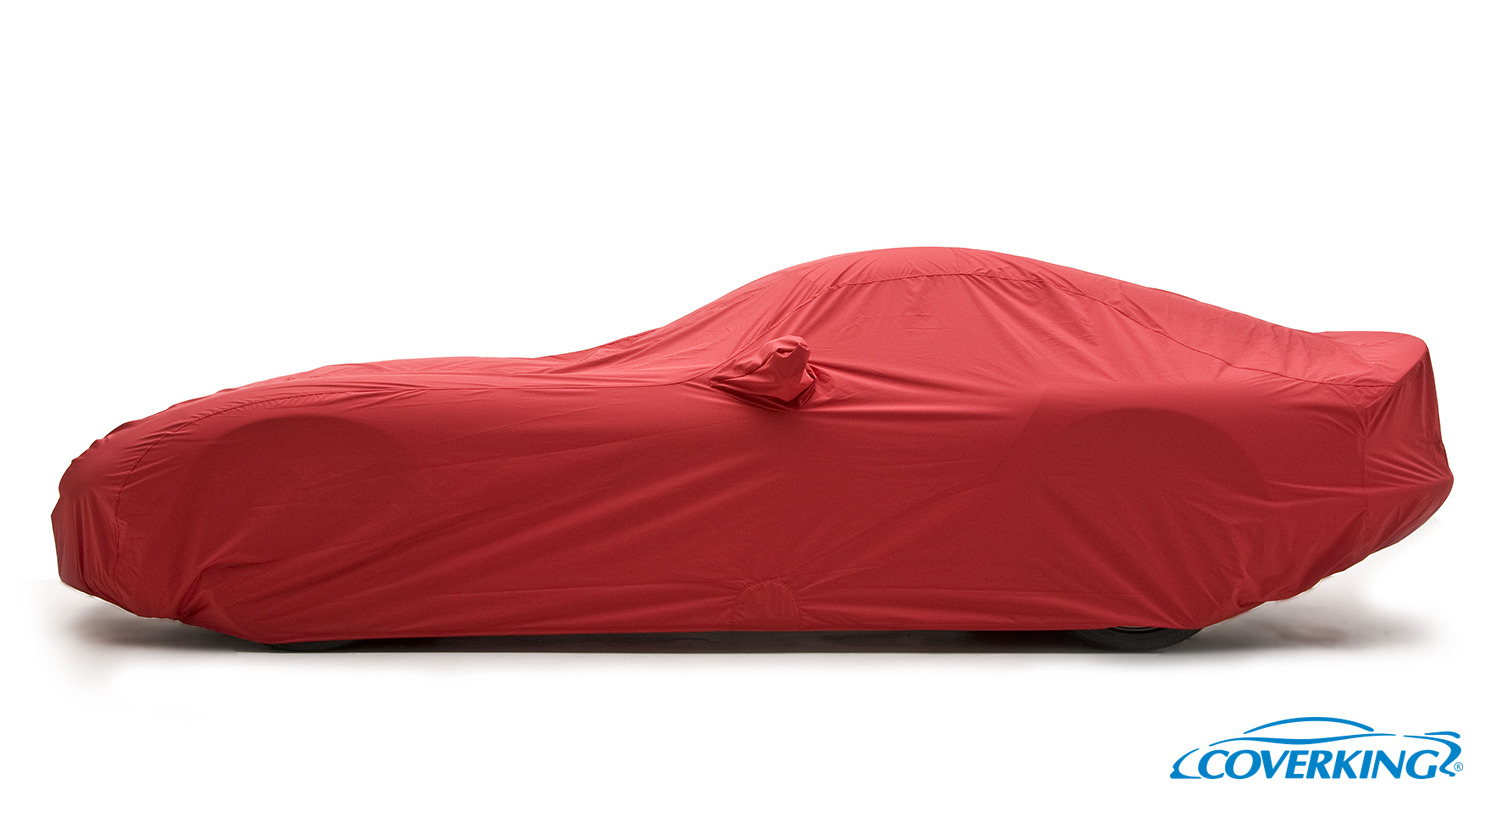 Coverking Stormproof Tailored Car Cover for Pontiac Firebird - Made to Order